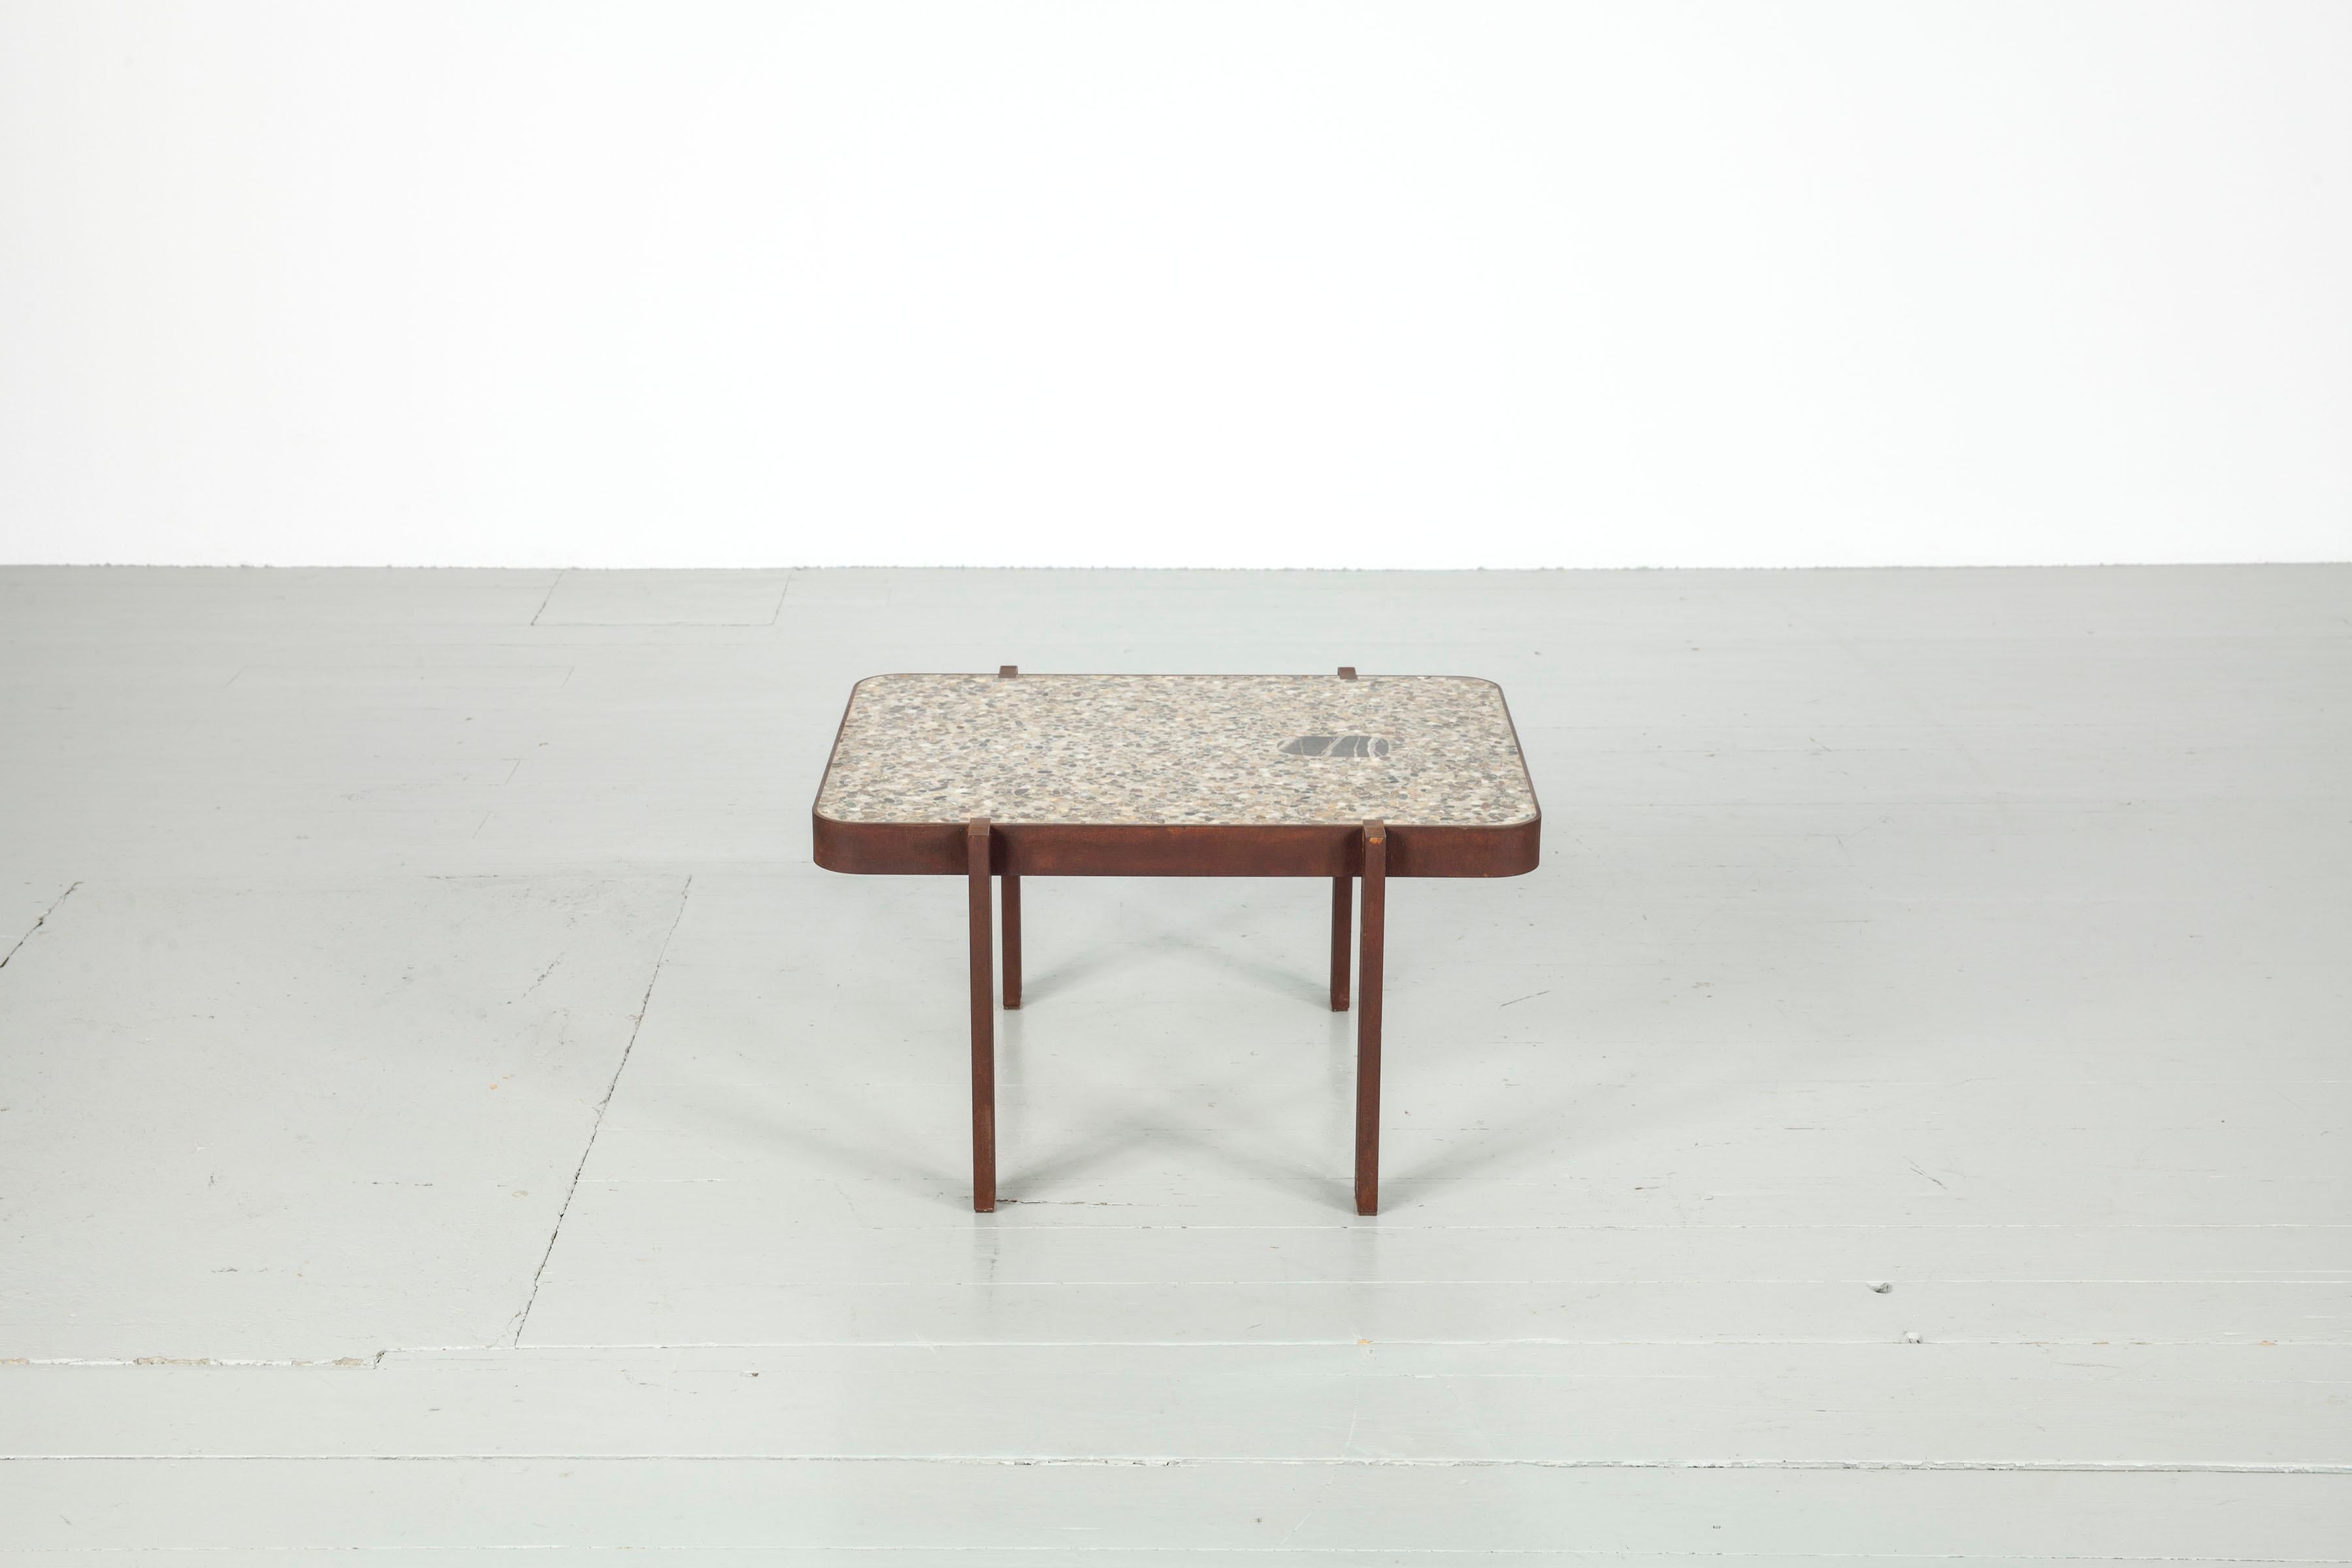 Felix Muhrhofer Contemporary Terrazzo Table with Corroded Steel Construction 9